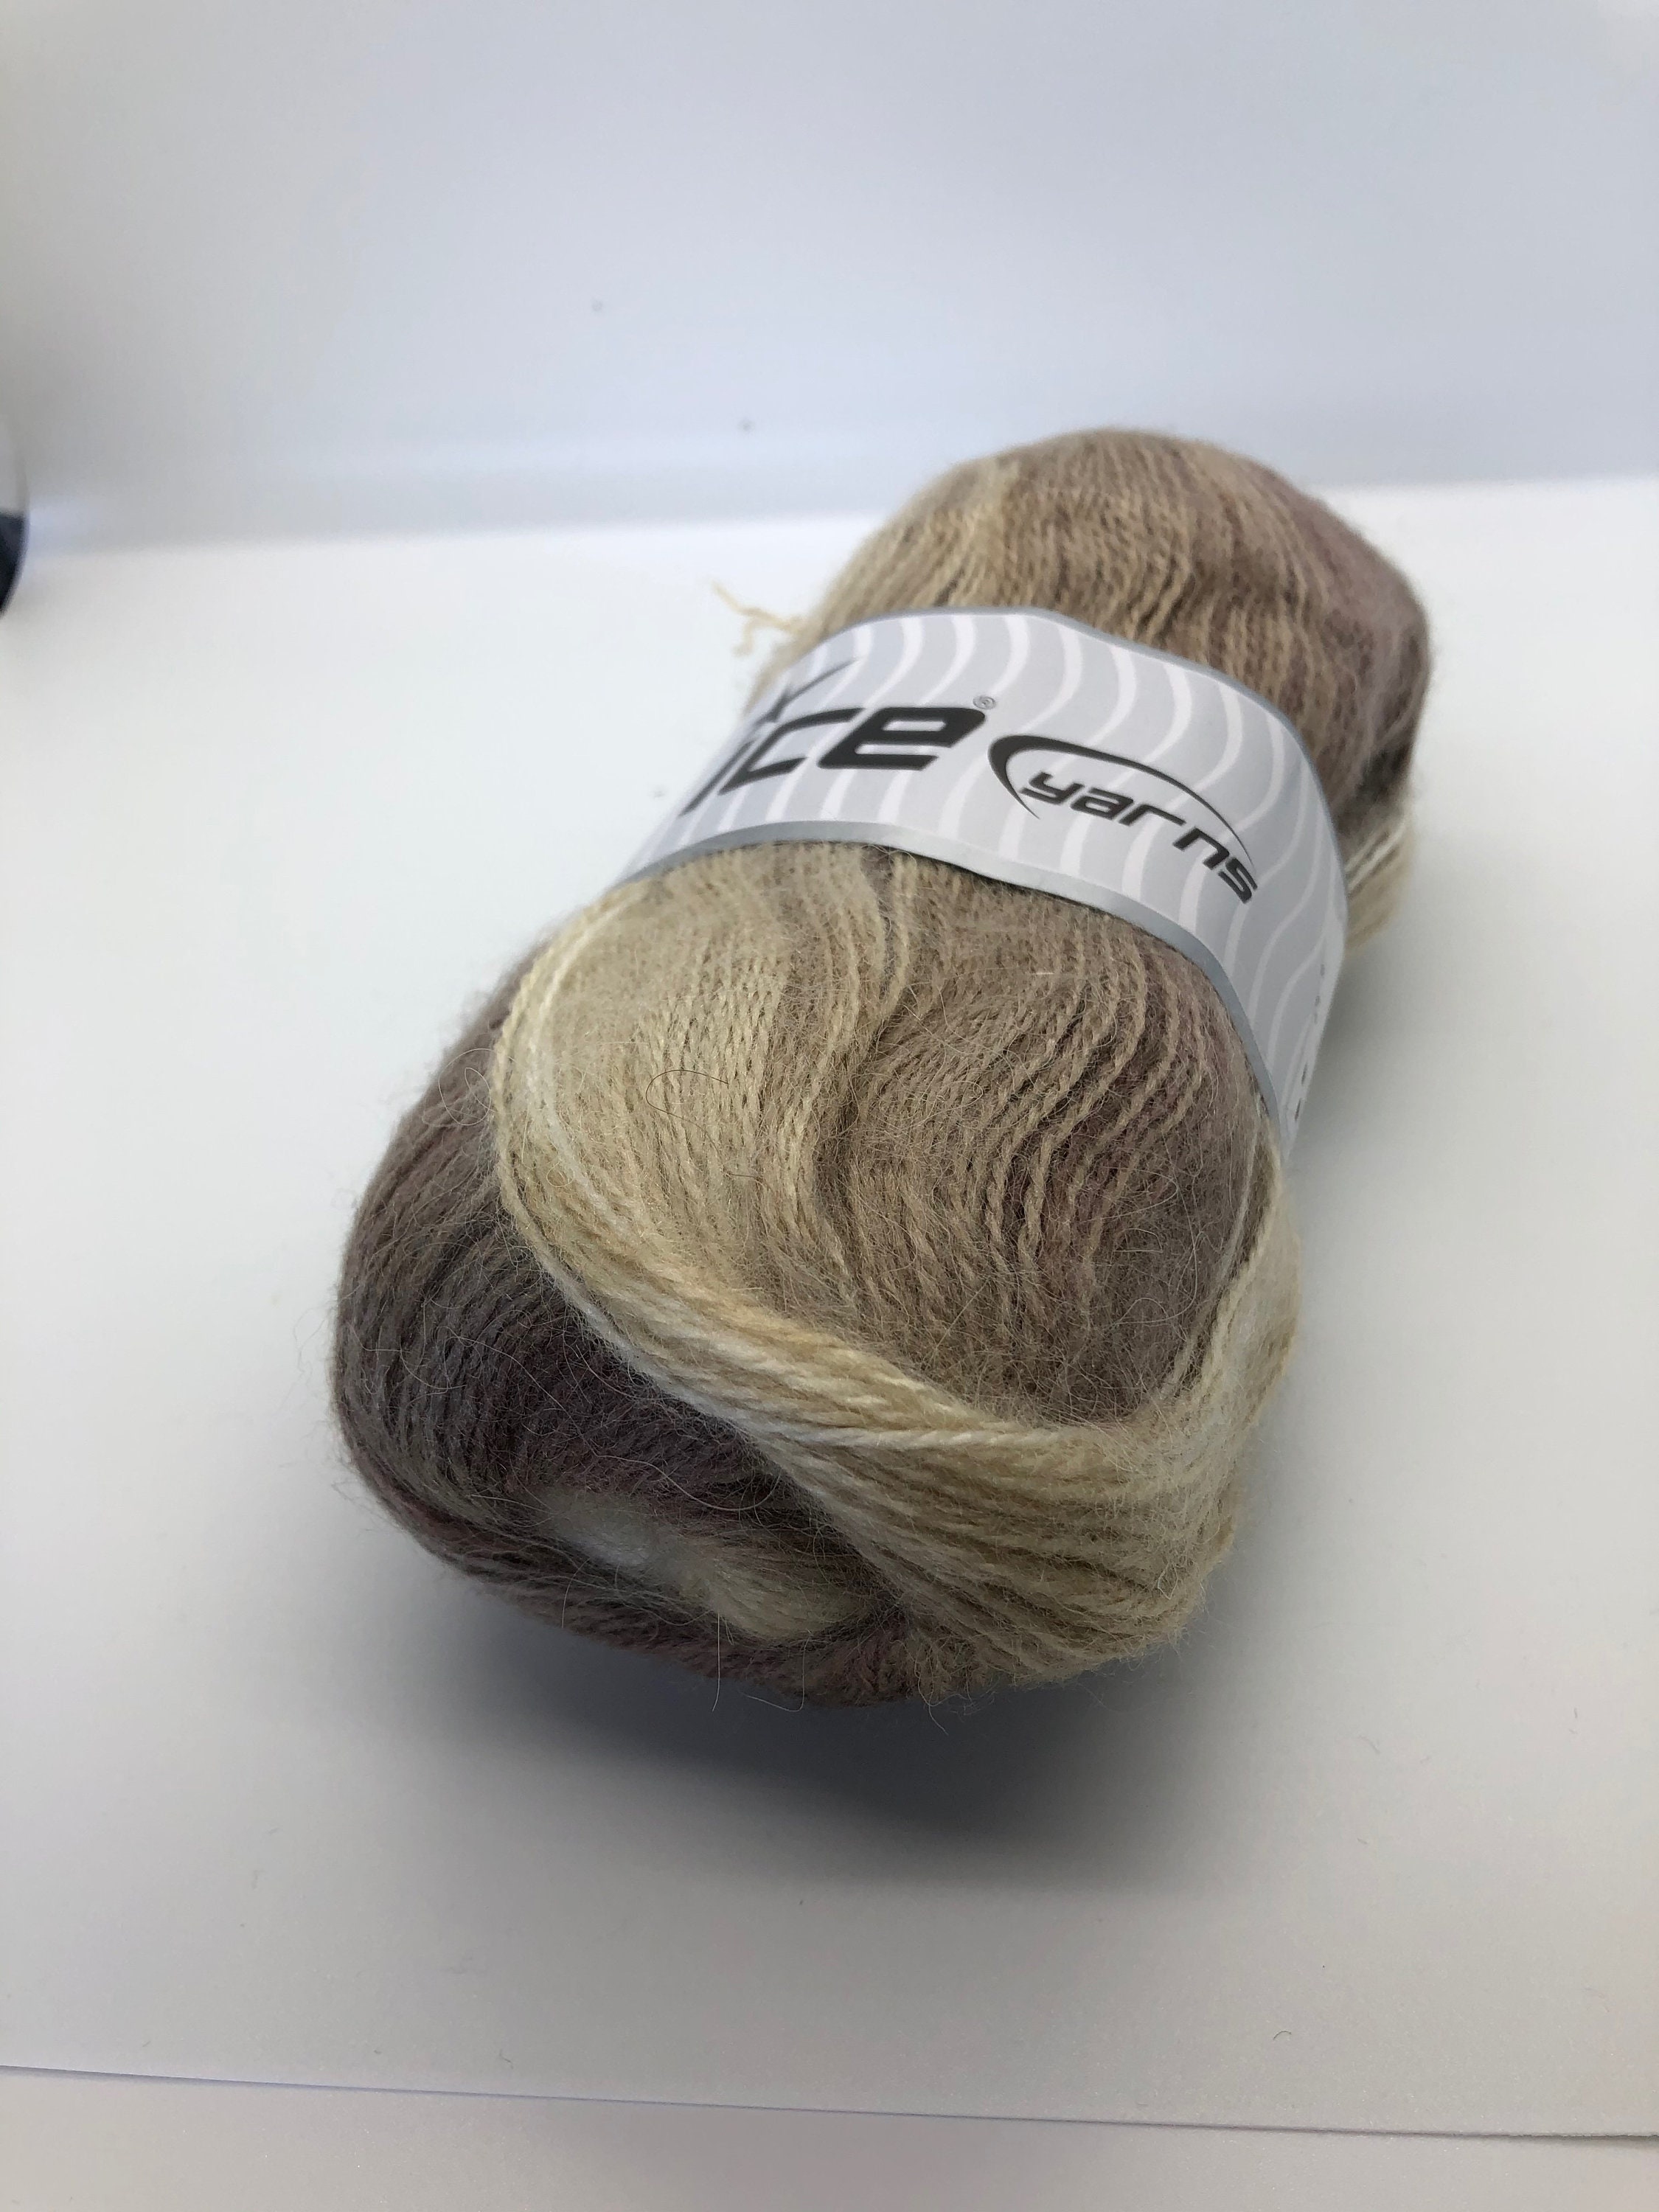 Sugar and Cream Cotton Yarn in Chocolate Ombre Color, Variegated